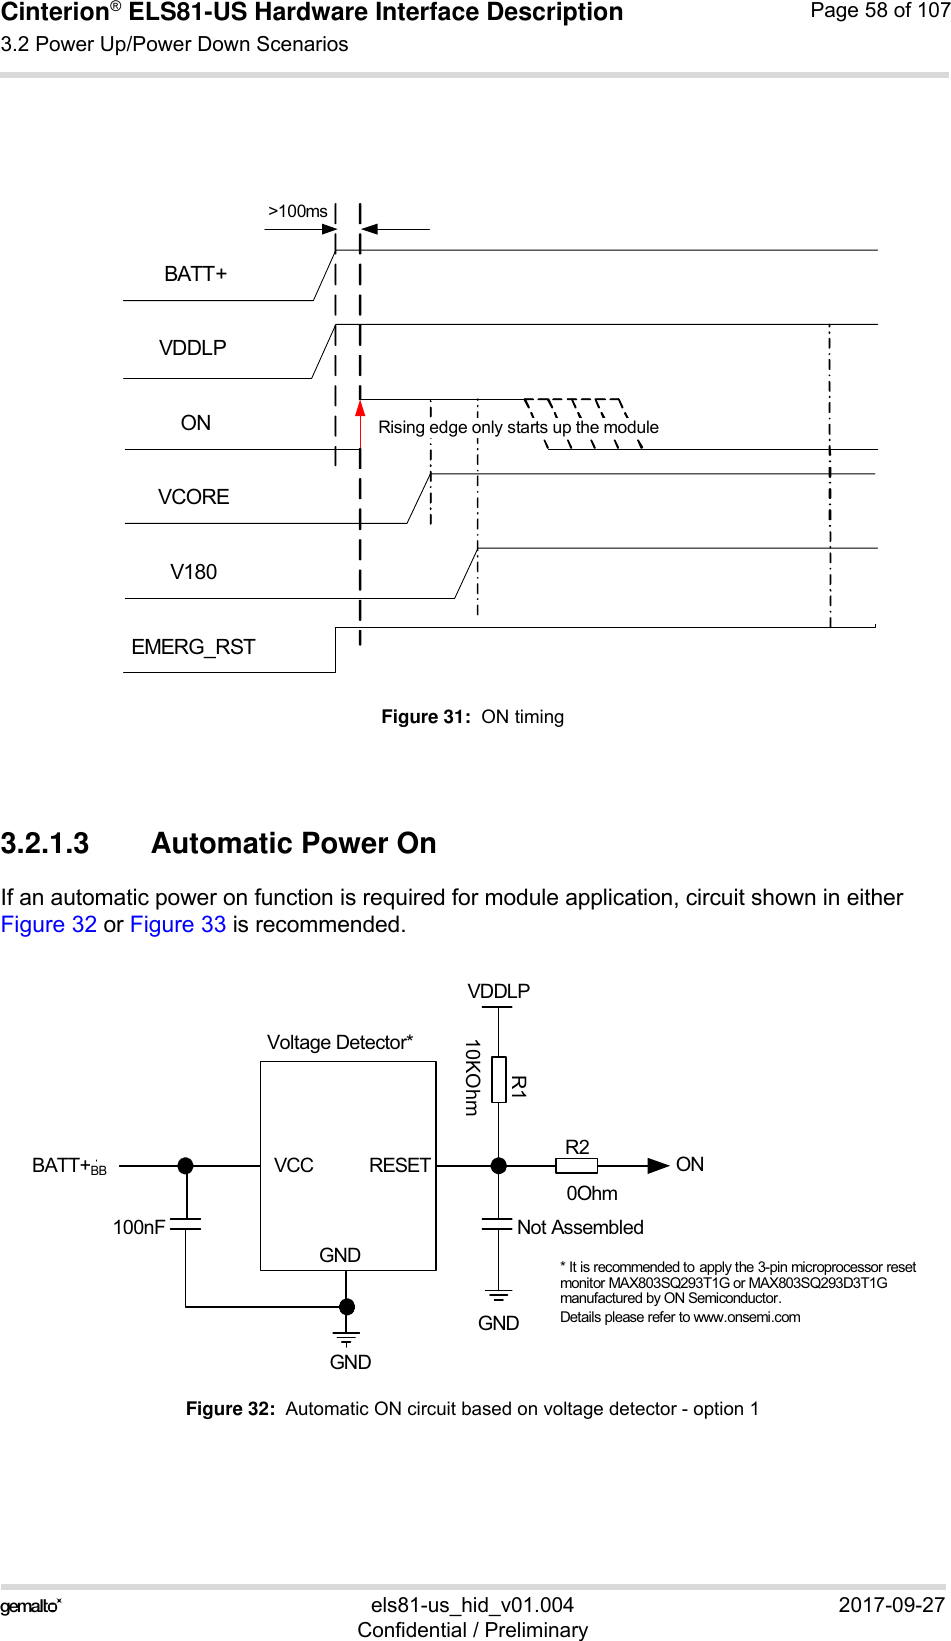 Cinterion® ELS81-US Hardware Interface Description3.2 Power Up/Power Down Scenarios77els81-us_hid_v01.004 2017-09-27Confidential / PreliminaryPage 58 of 107Figure 31:  ON timing3.2.1.3 Automatic Power OnIf an automatic power on function is required for module application, circuit shown in eitherFigure 32 or Figure 33 is recommended.Figure 32:  Automatic ON circuit based on voltage detector - option 1BATT+ONEMERG_RSTV180VCOREVDDLPRising edge only starts up the module&gt;100msVoltage Detector*BATT+BBGNDONVDDLPGND* It is recommended to apply the 3-pin microprocessor reset monitor MAX803SQ293T1G or MAX803SQ293D3T1Gmanufactured by ON Semiconductor. Details please refer to www.onsemi.comVCC RESETGND100nF Not AssembledR110KOhmR20Ohm